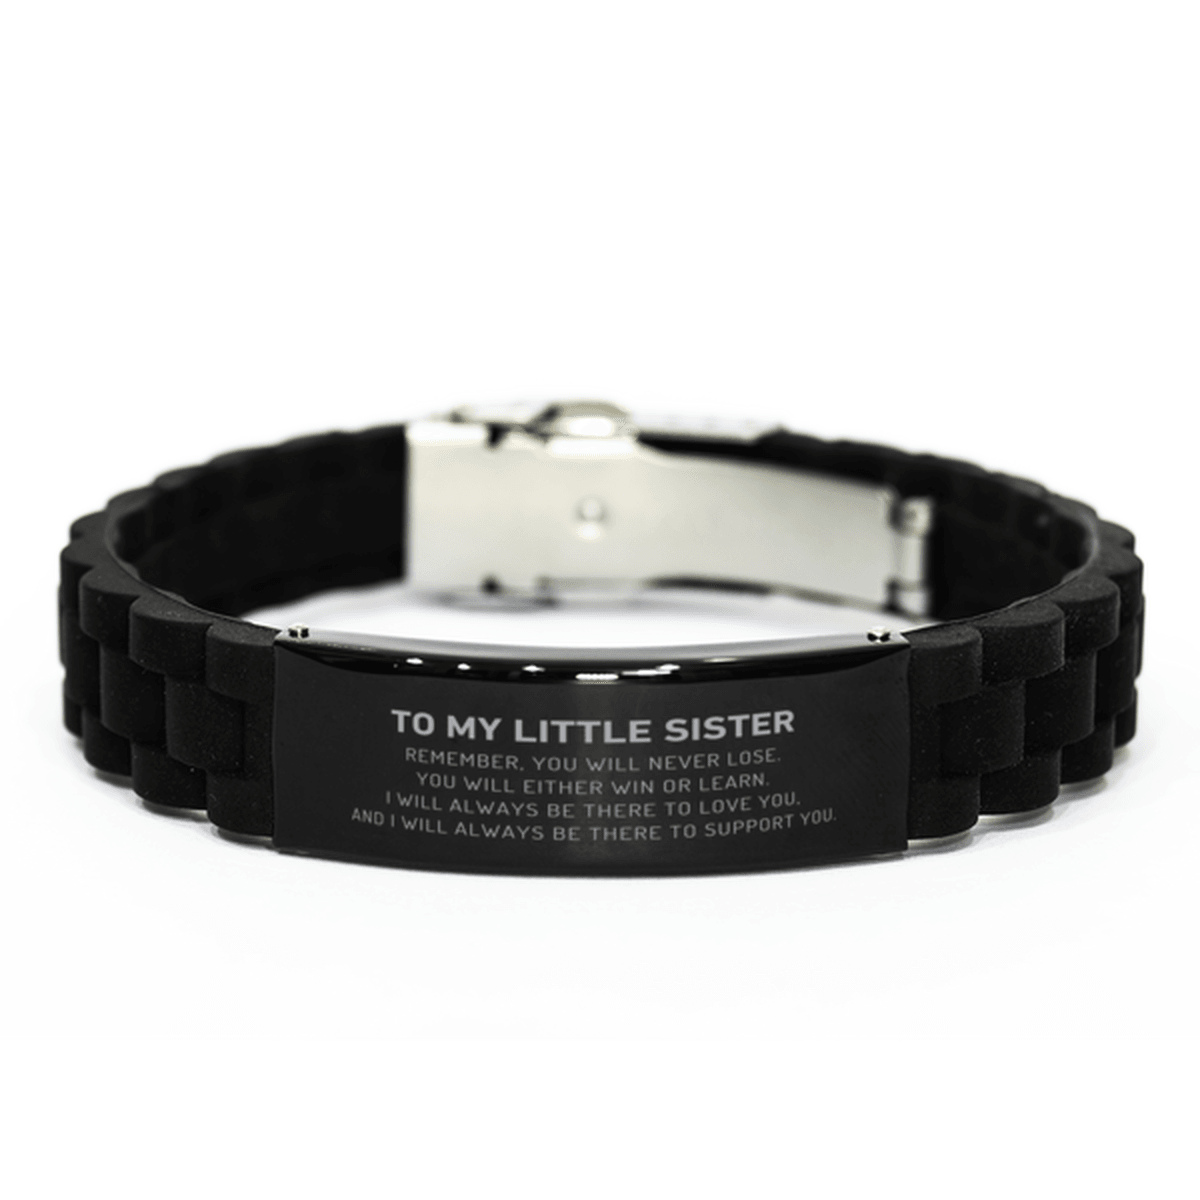 Little Sister Gifts, To My Little Sister Remember, you will never lose. You will either WIN or LEARN, Keepsake Black Glidelock Clasp Bracelet For Little Sister Engraved, Birthday Christmas Gifts Ideas For Little Sister X-mas Gifts